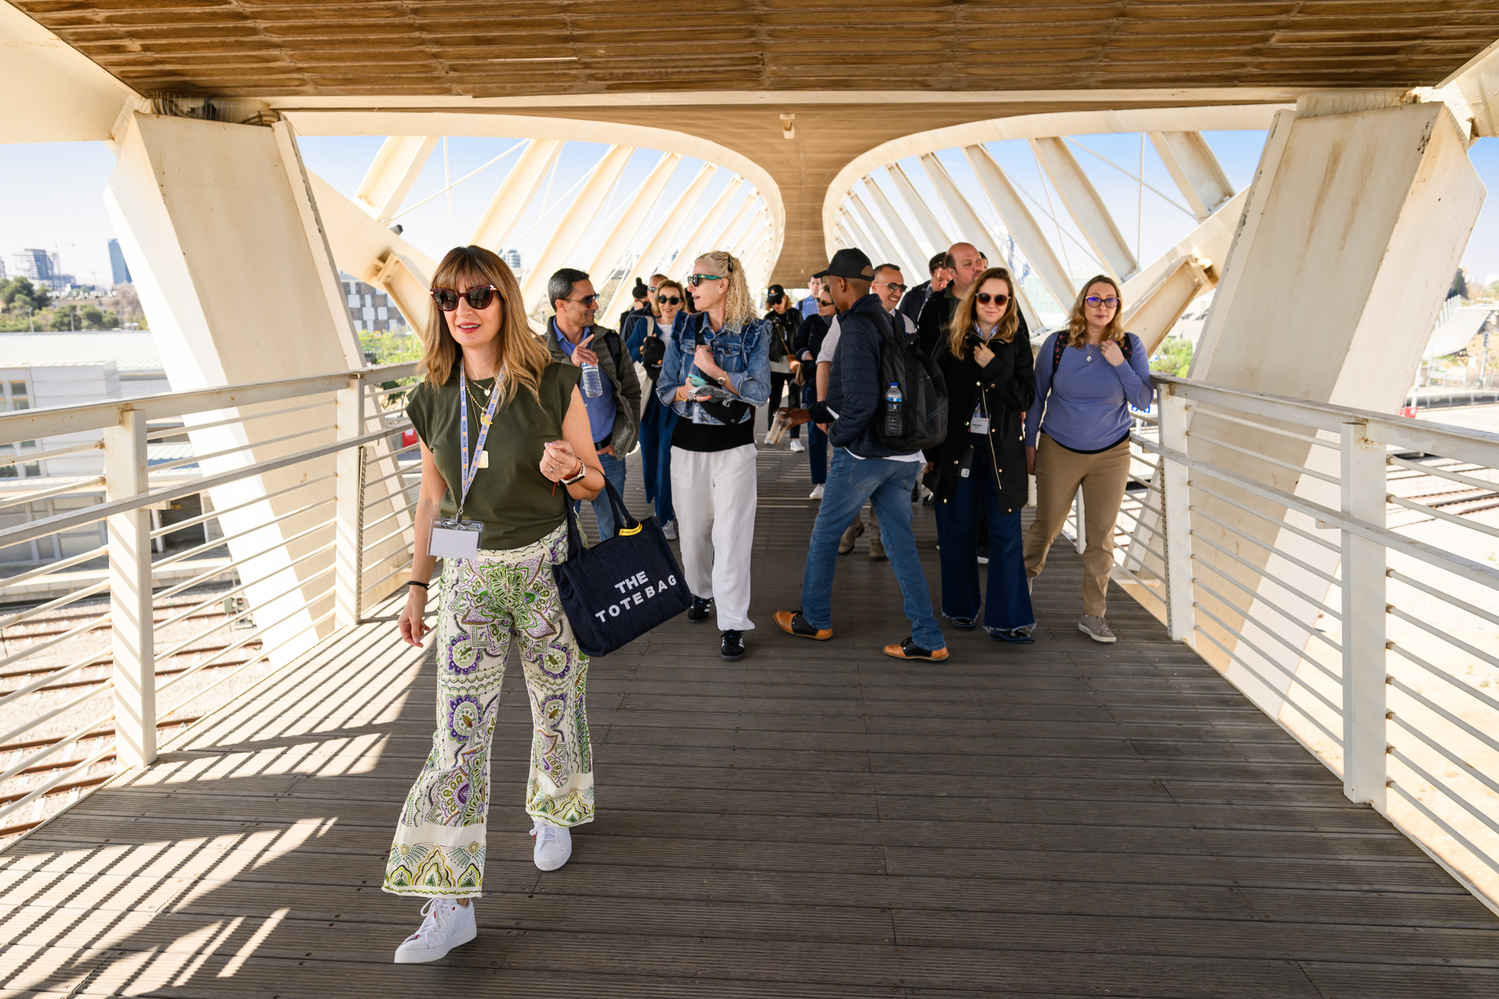 Halutz cohort 1 walk across the DNA bridge during their visit to the campus in Beer-Sheva